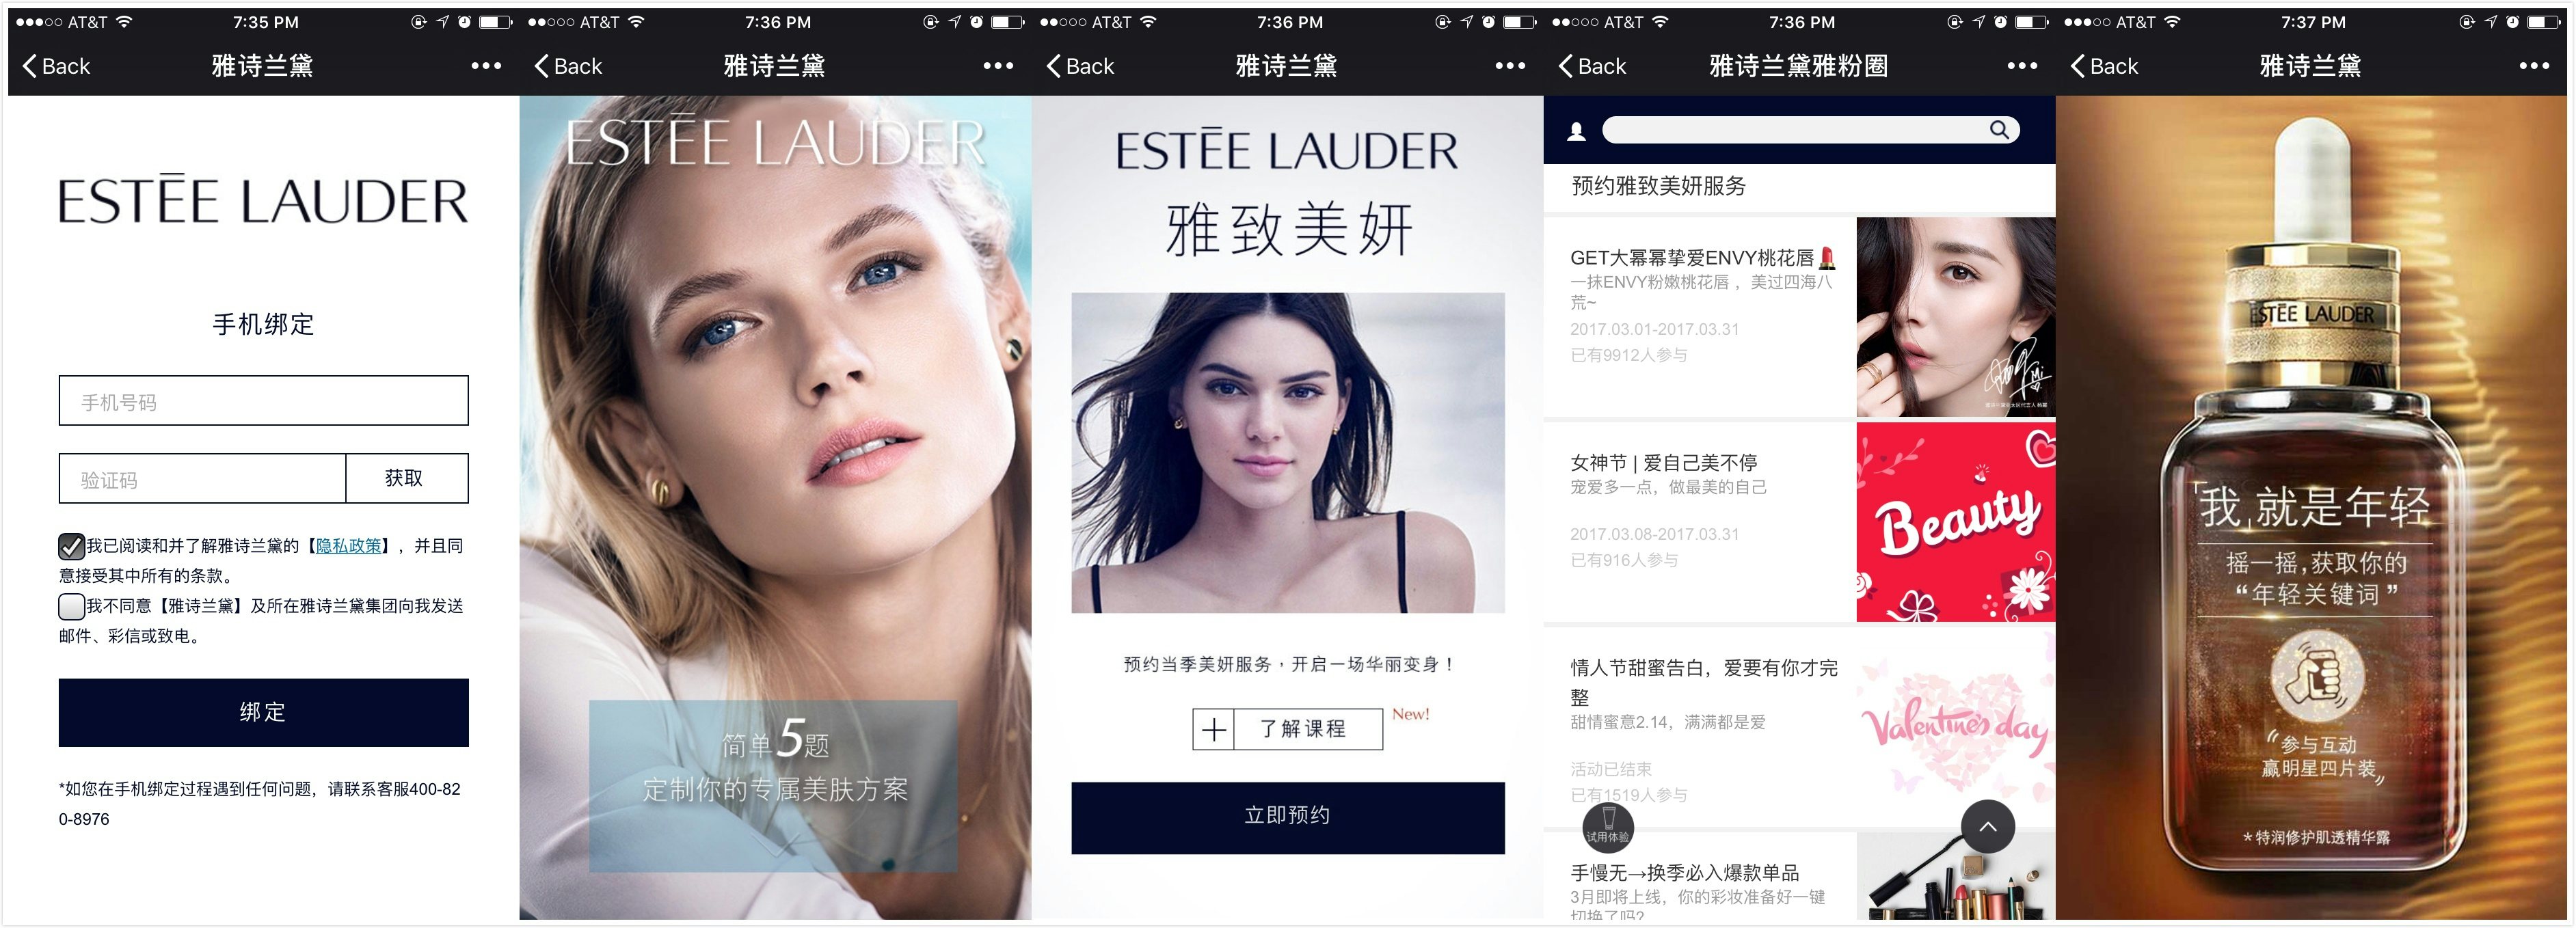 As the "sole genius" brand in L2's Digital IQ Index, premium cosmetic producer Estée Lauder has found a way to use WeChat as a CRM and social commerce platform.